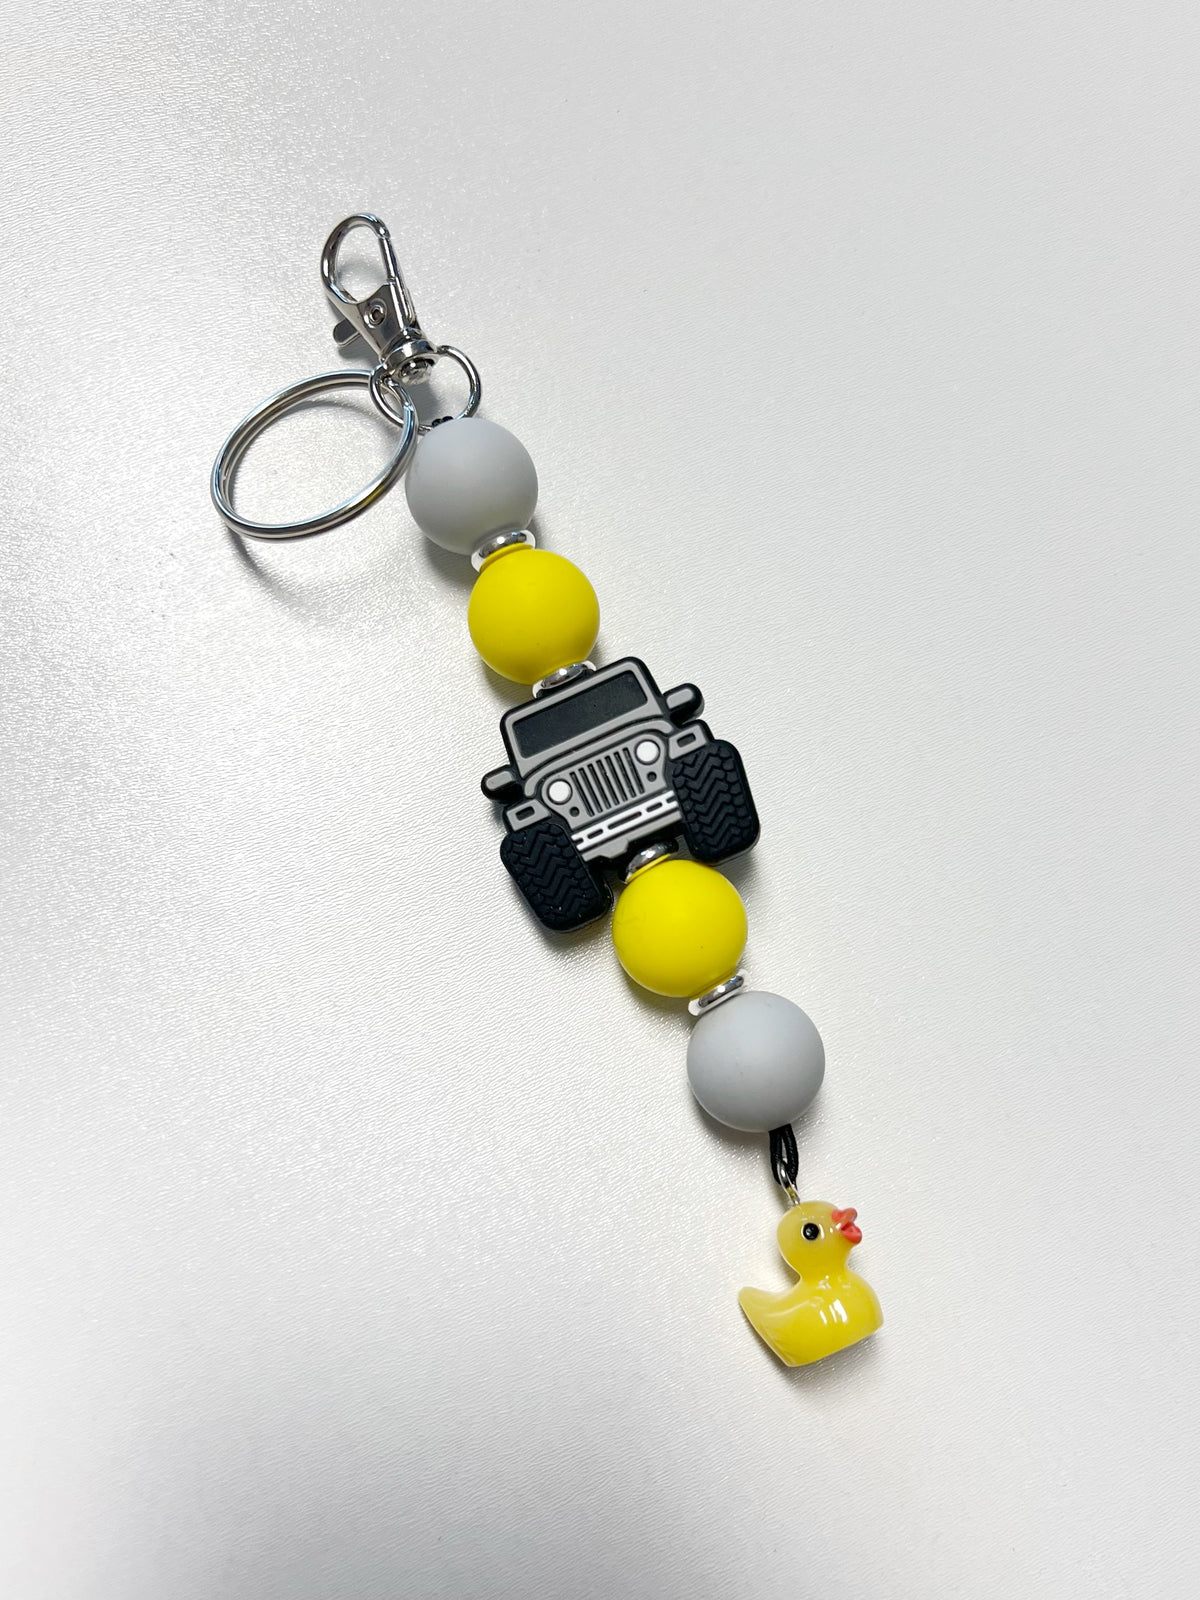 Durable handmade rubber duckie charm keychain with Jeep Wrangler 4x4 off-road vehicle in grey